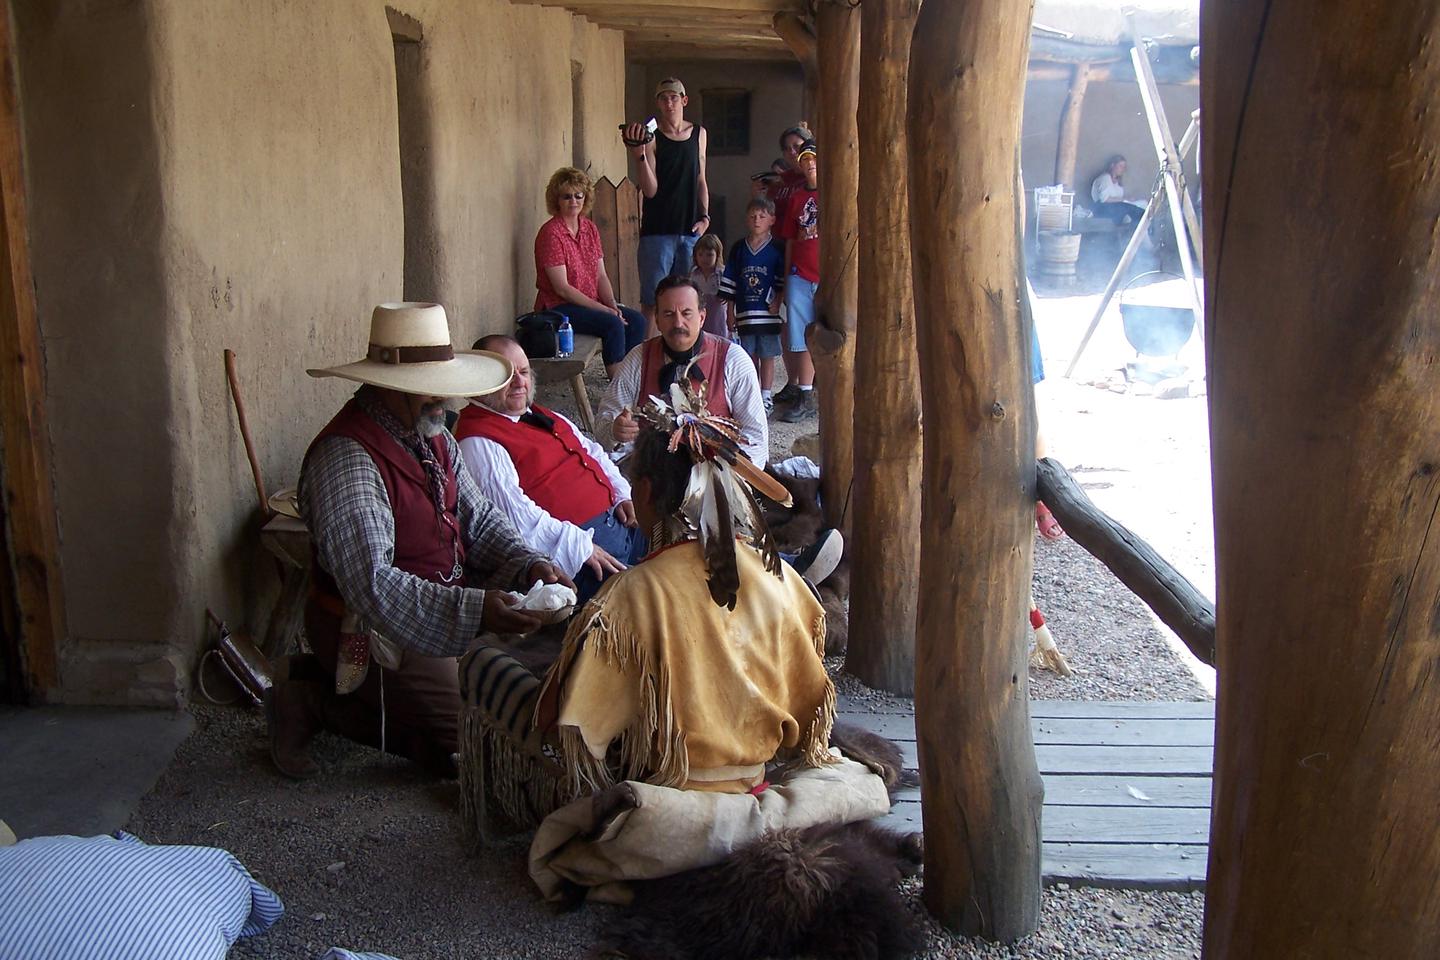 A Lakota warrior barters with the traders in the fort plazaTrade with a Lakota warrior for trade goods from around the world.